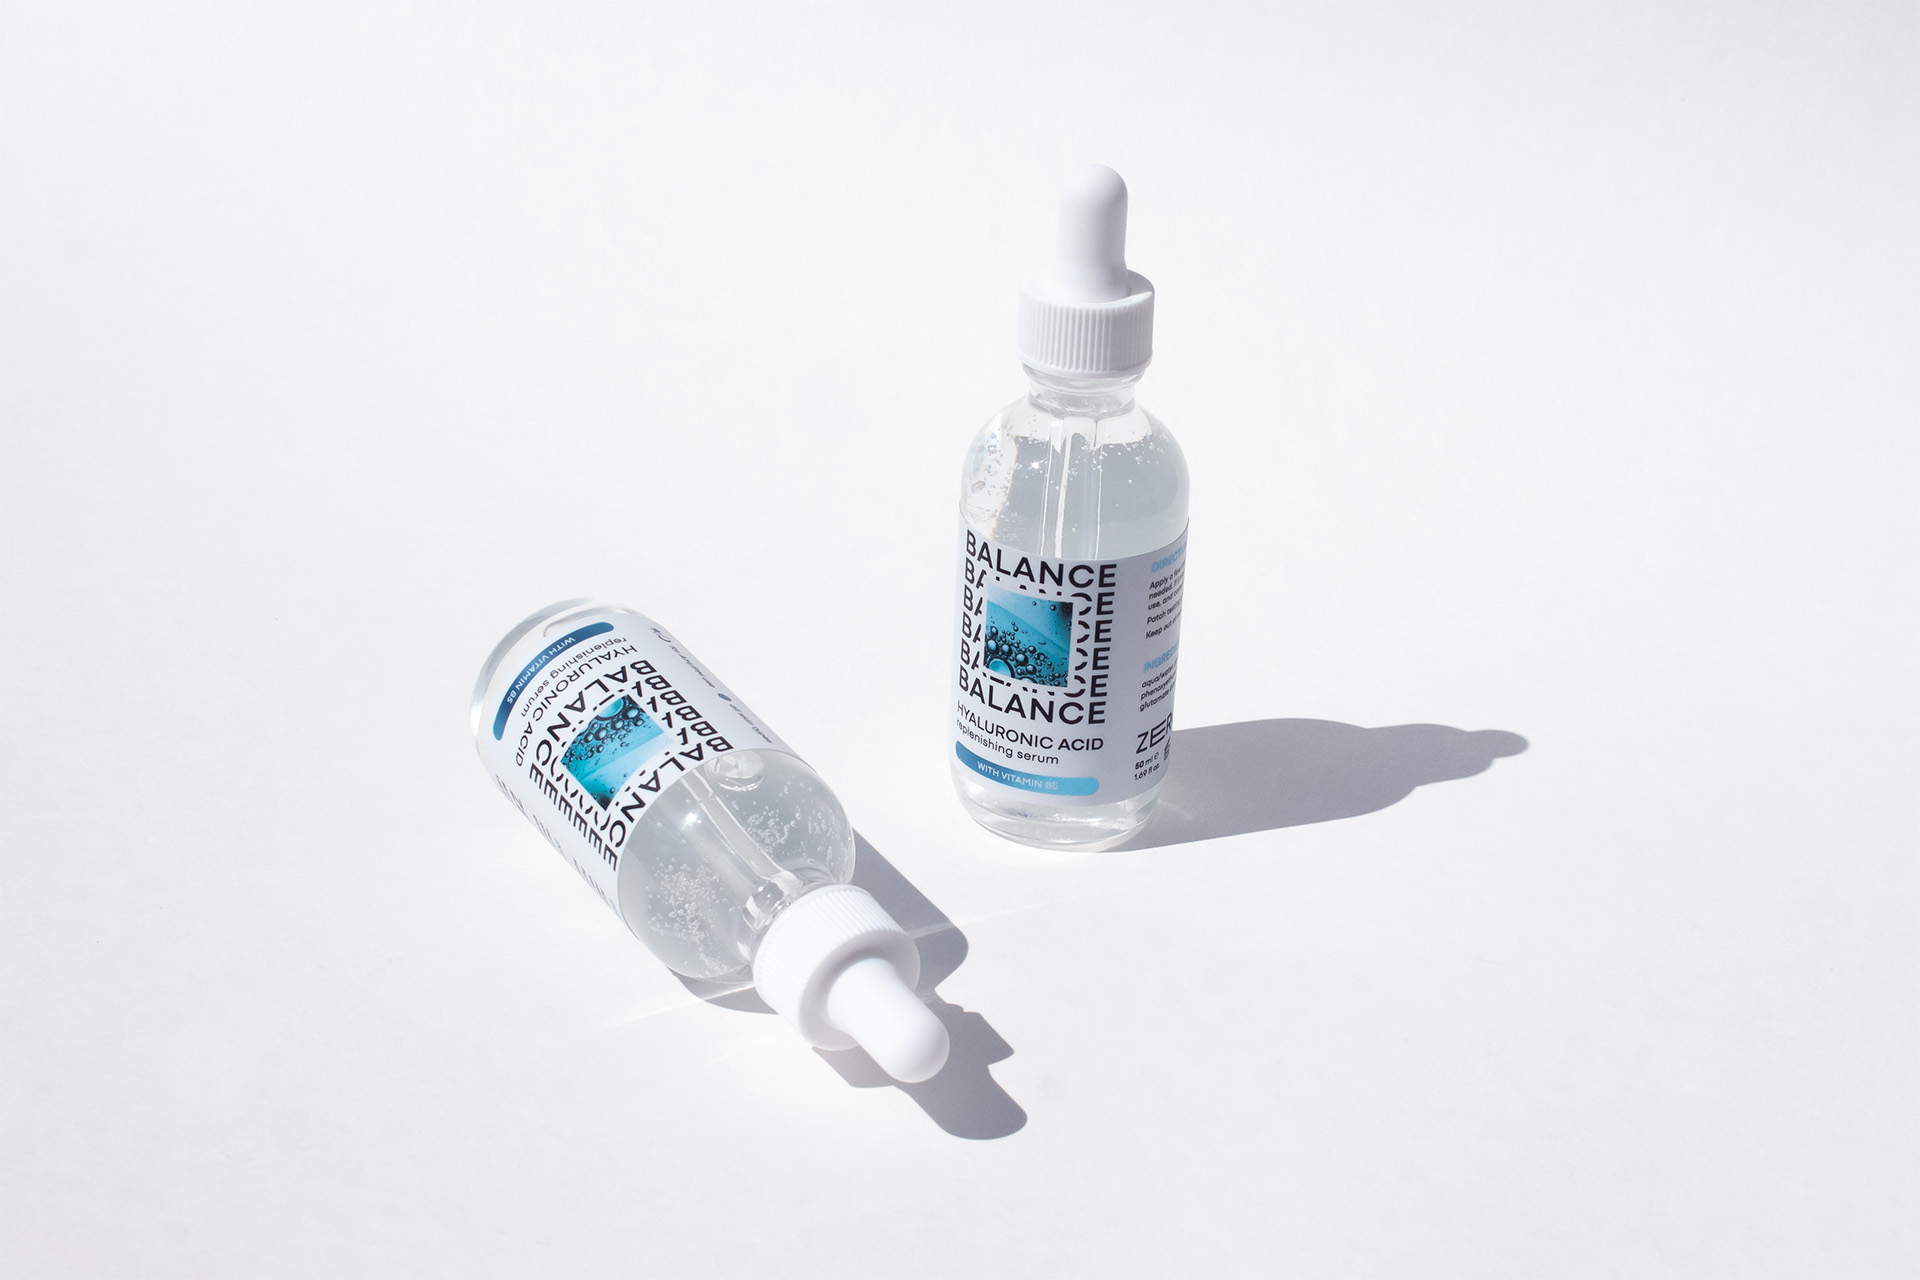 image of two hyaluronic acid serum bottles with extended content label on metallized film